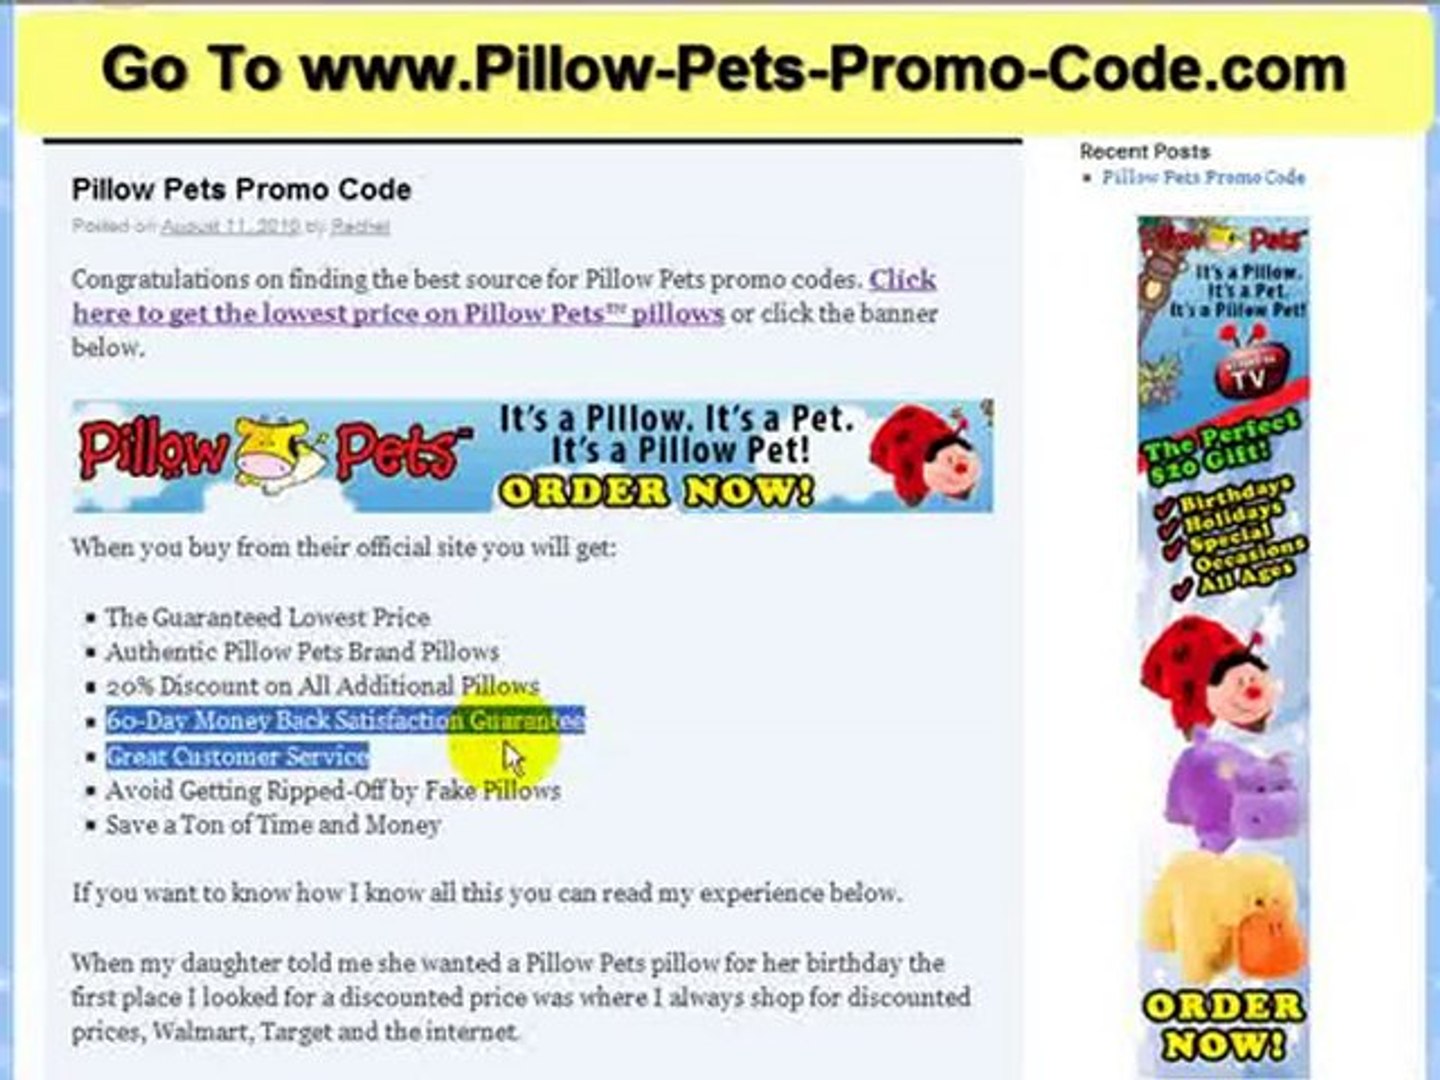 Pillow Pets Promo Code | Save 20% on Pillow Pes - video Dailymotion